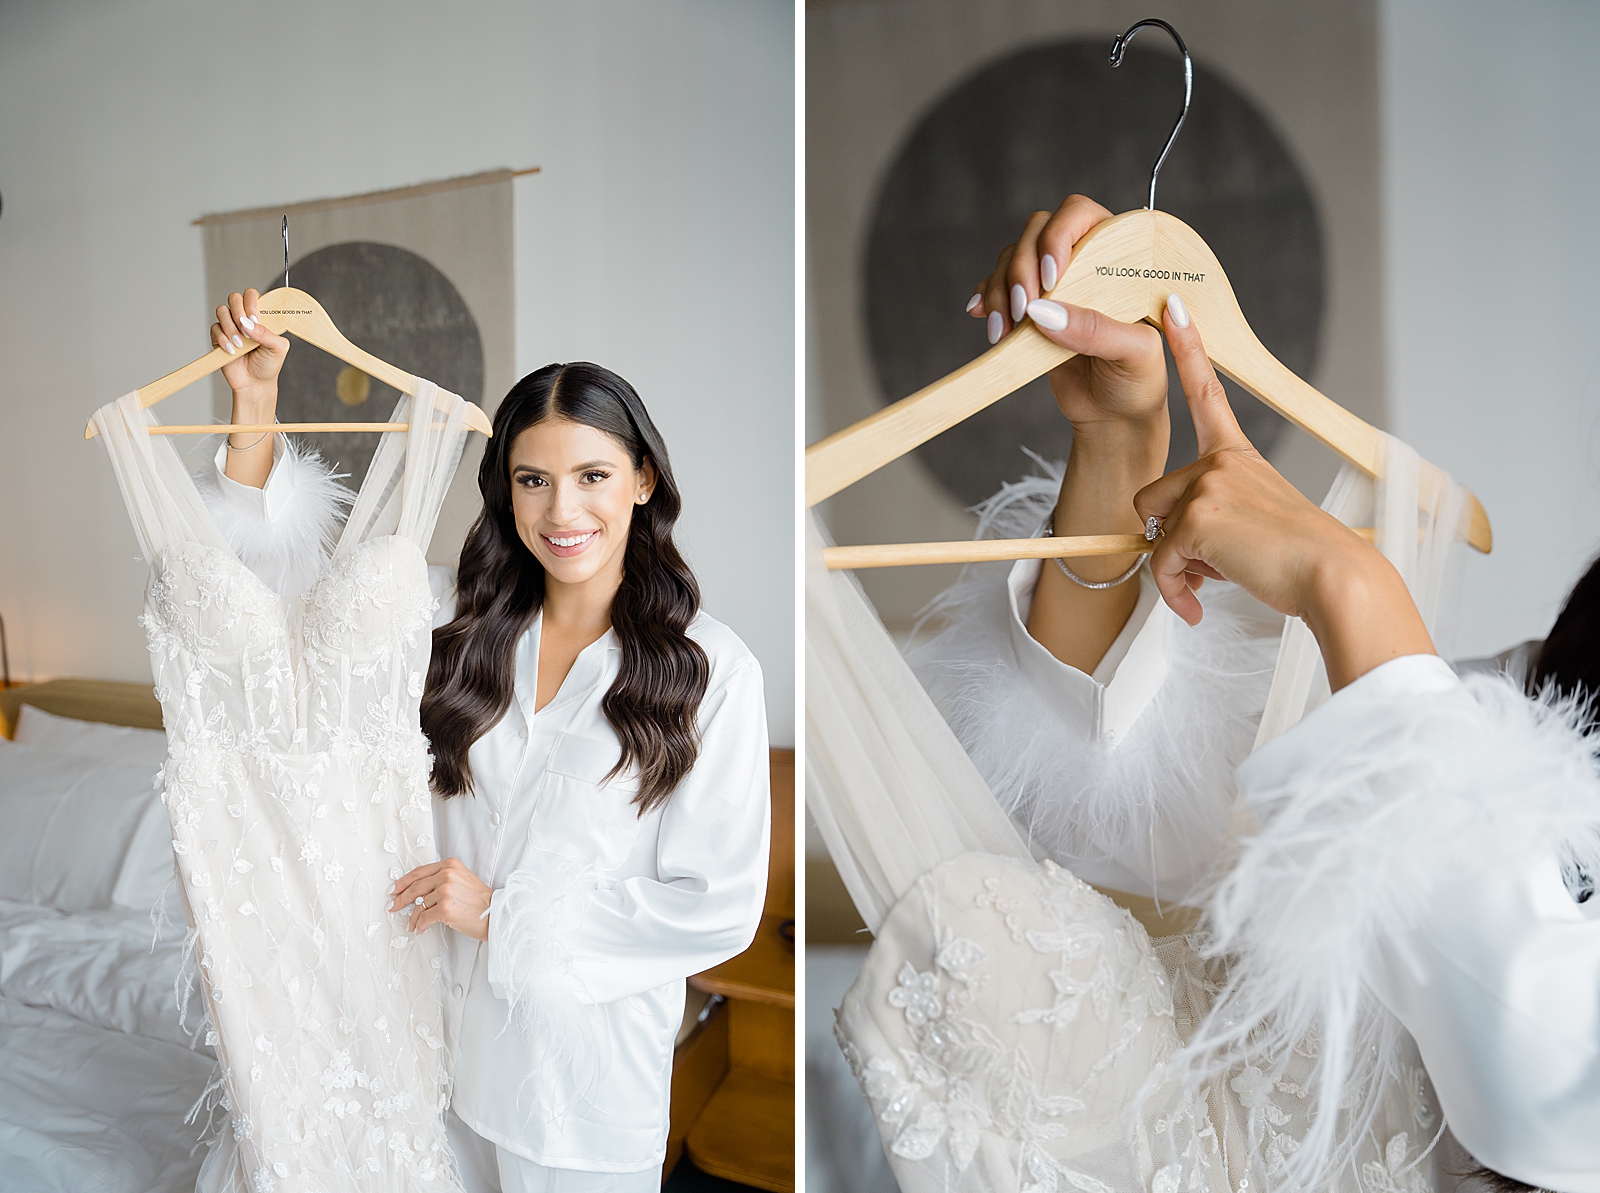 Left photo: Shot of the bride holding up her wedding gown.
Right photo: Shot of the bride holding her wedding gown and pointing to where the hanger says, "you look good in that." 